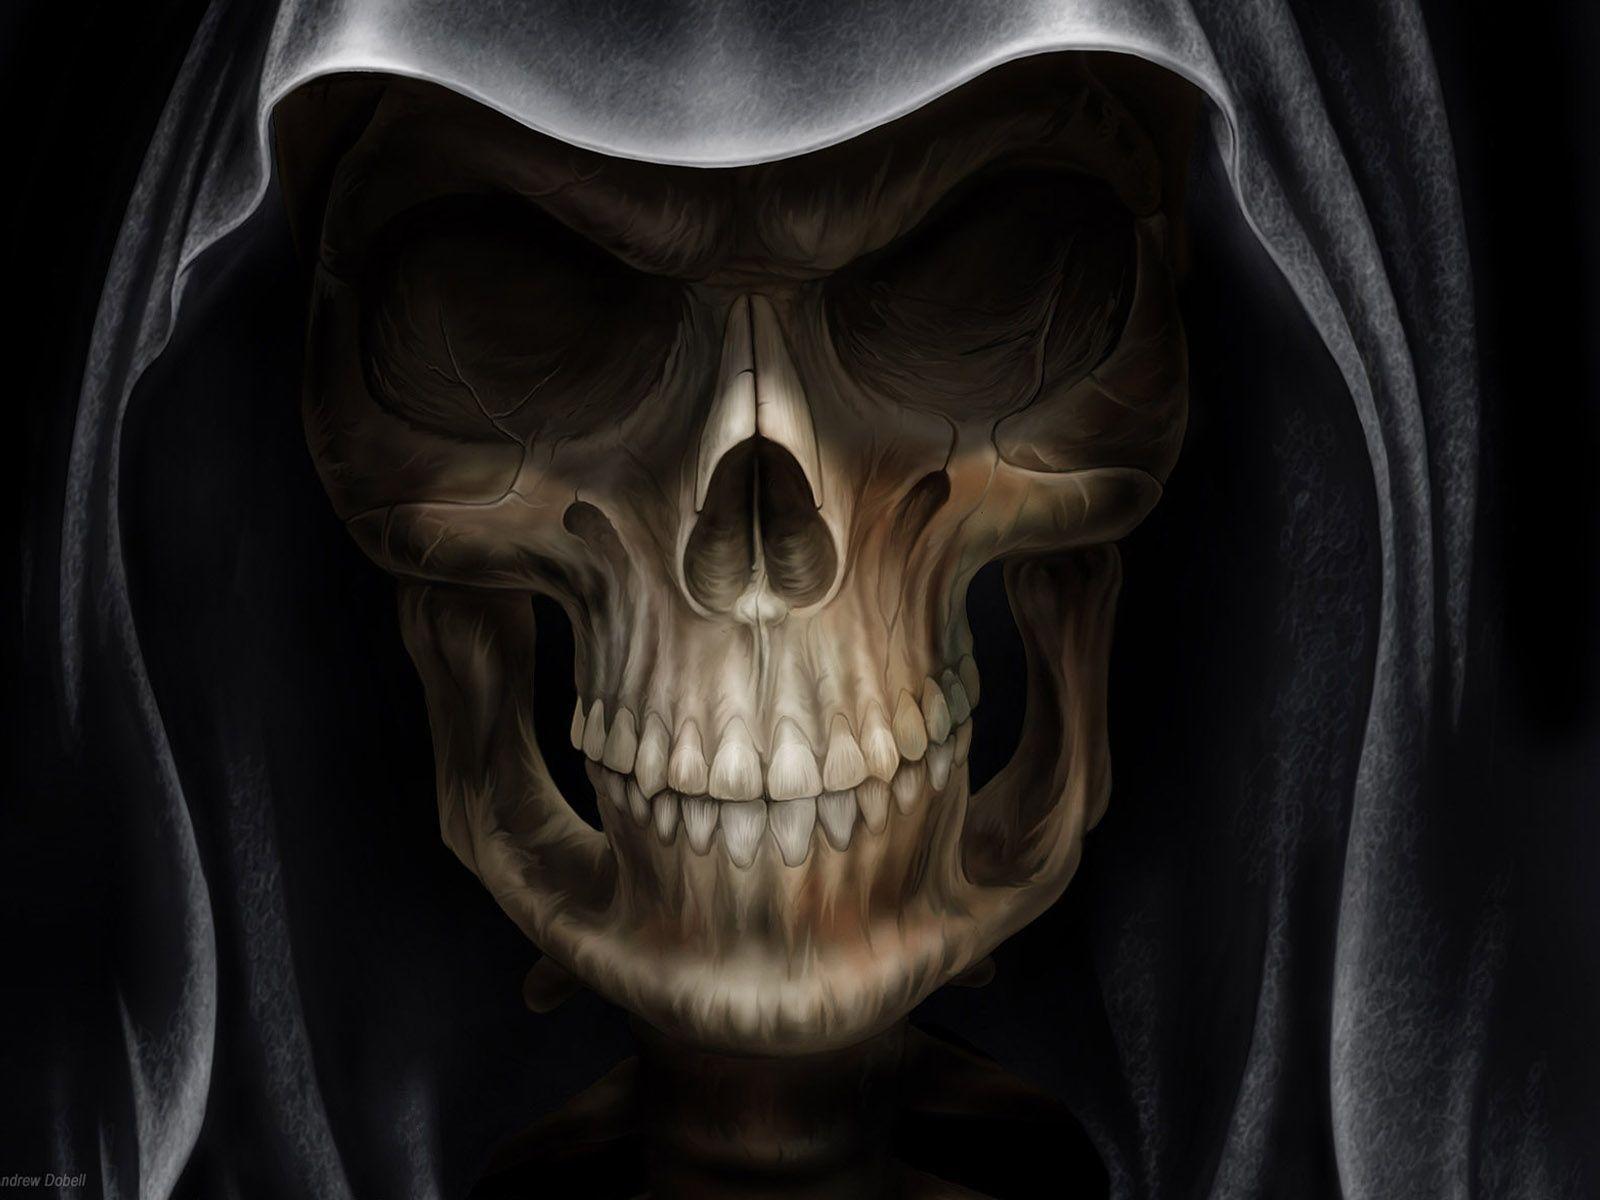 Awesome Skull Wallpaper Free Awesome Skull